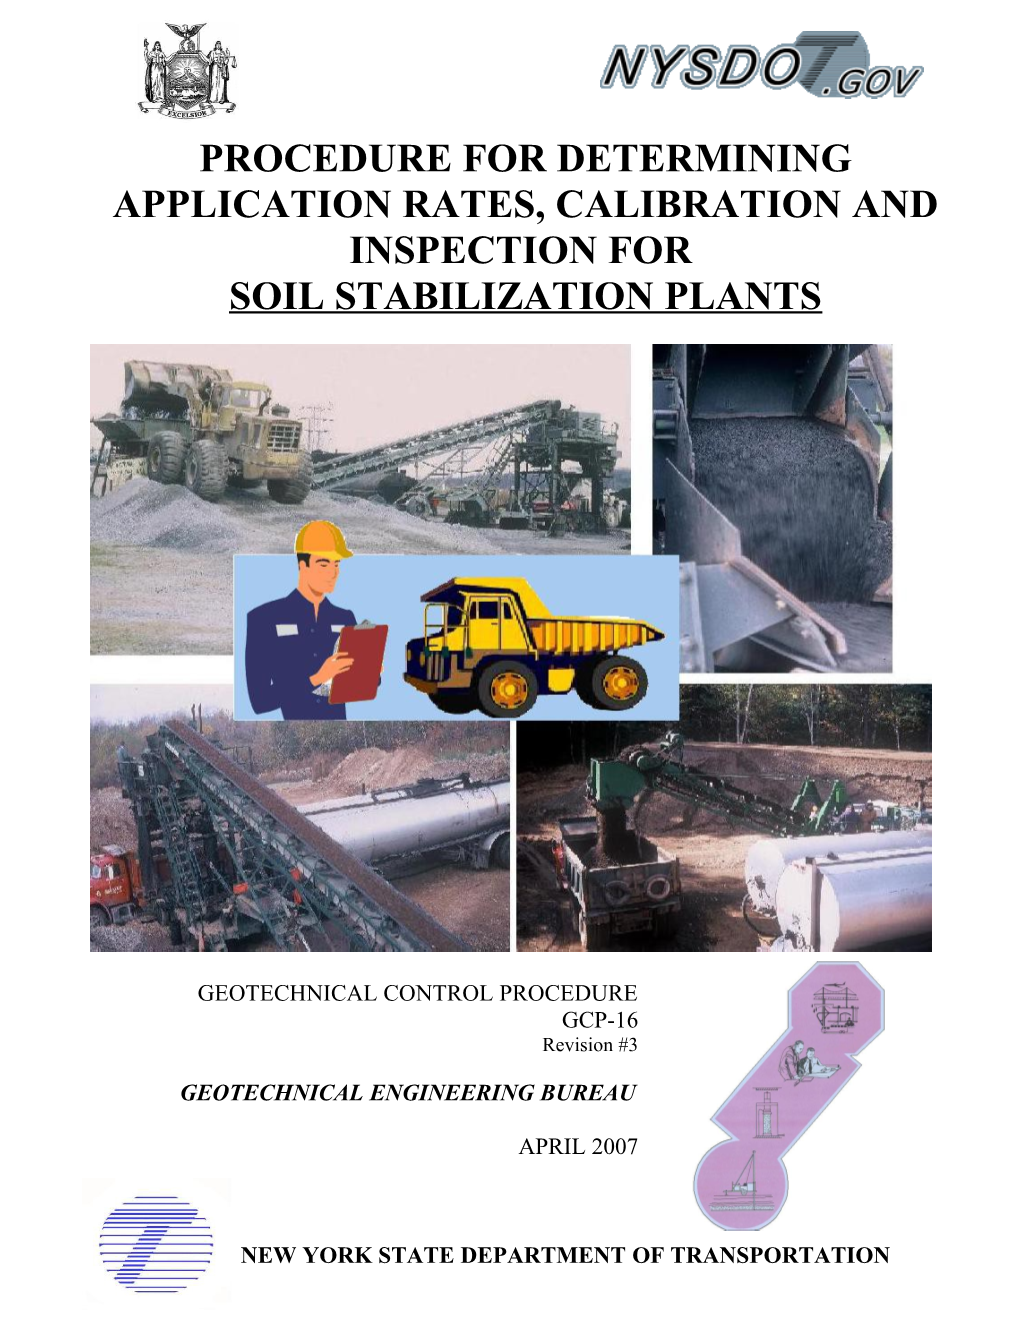 Procedure for Determining Application Rates, Calibration and Inspection For